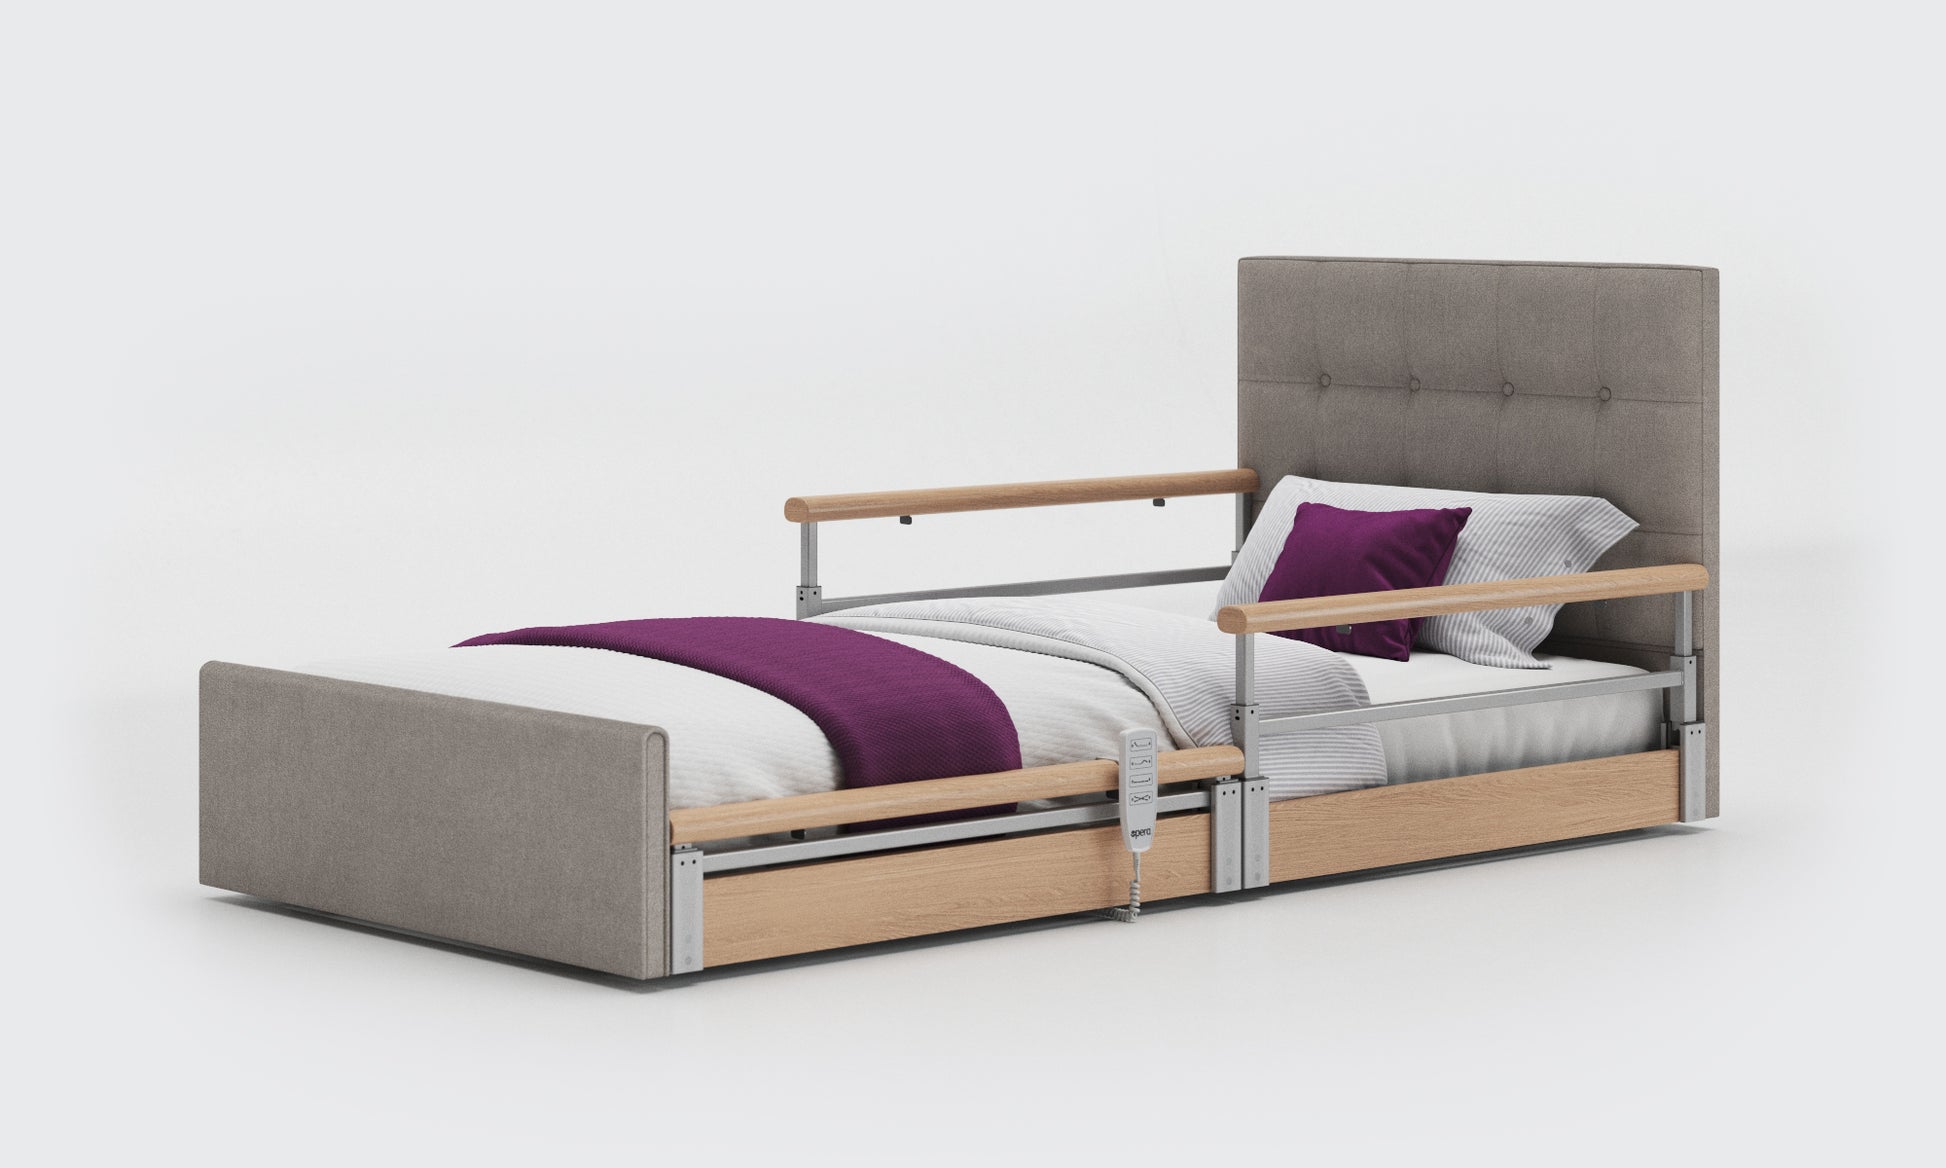 solo comfort plus bed in 3ft with oak split rails and an emerald headboard in zinc fabric